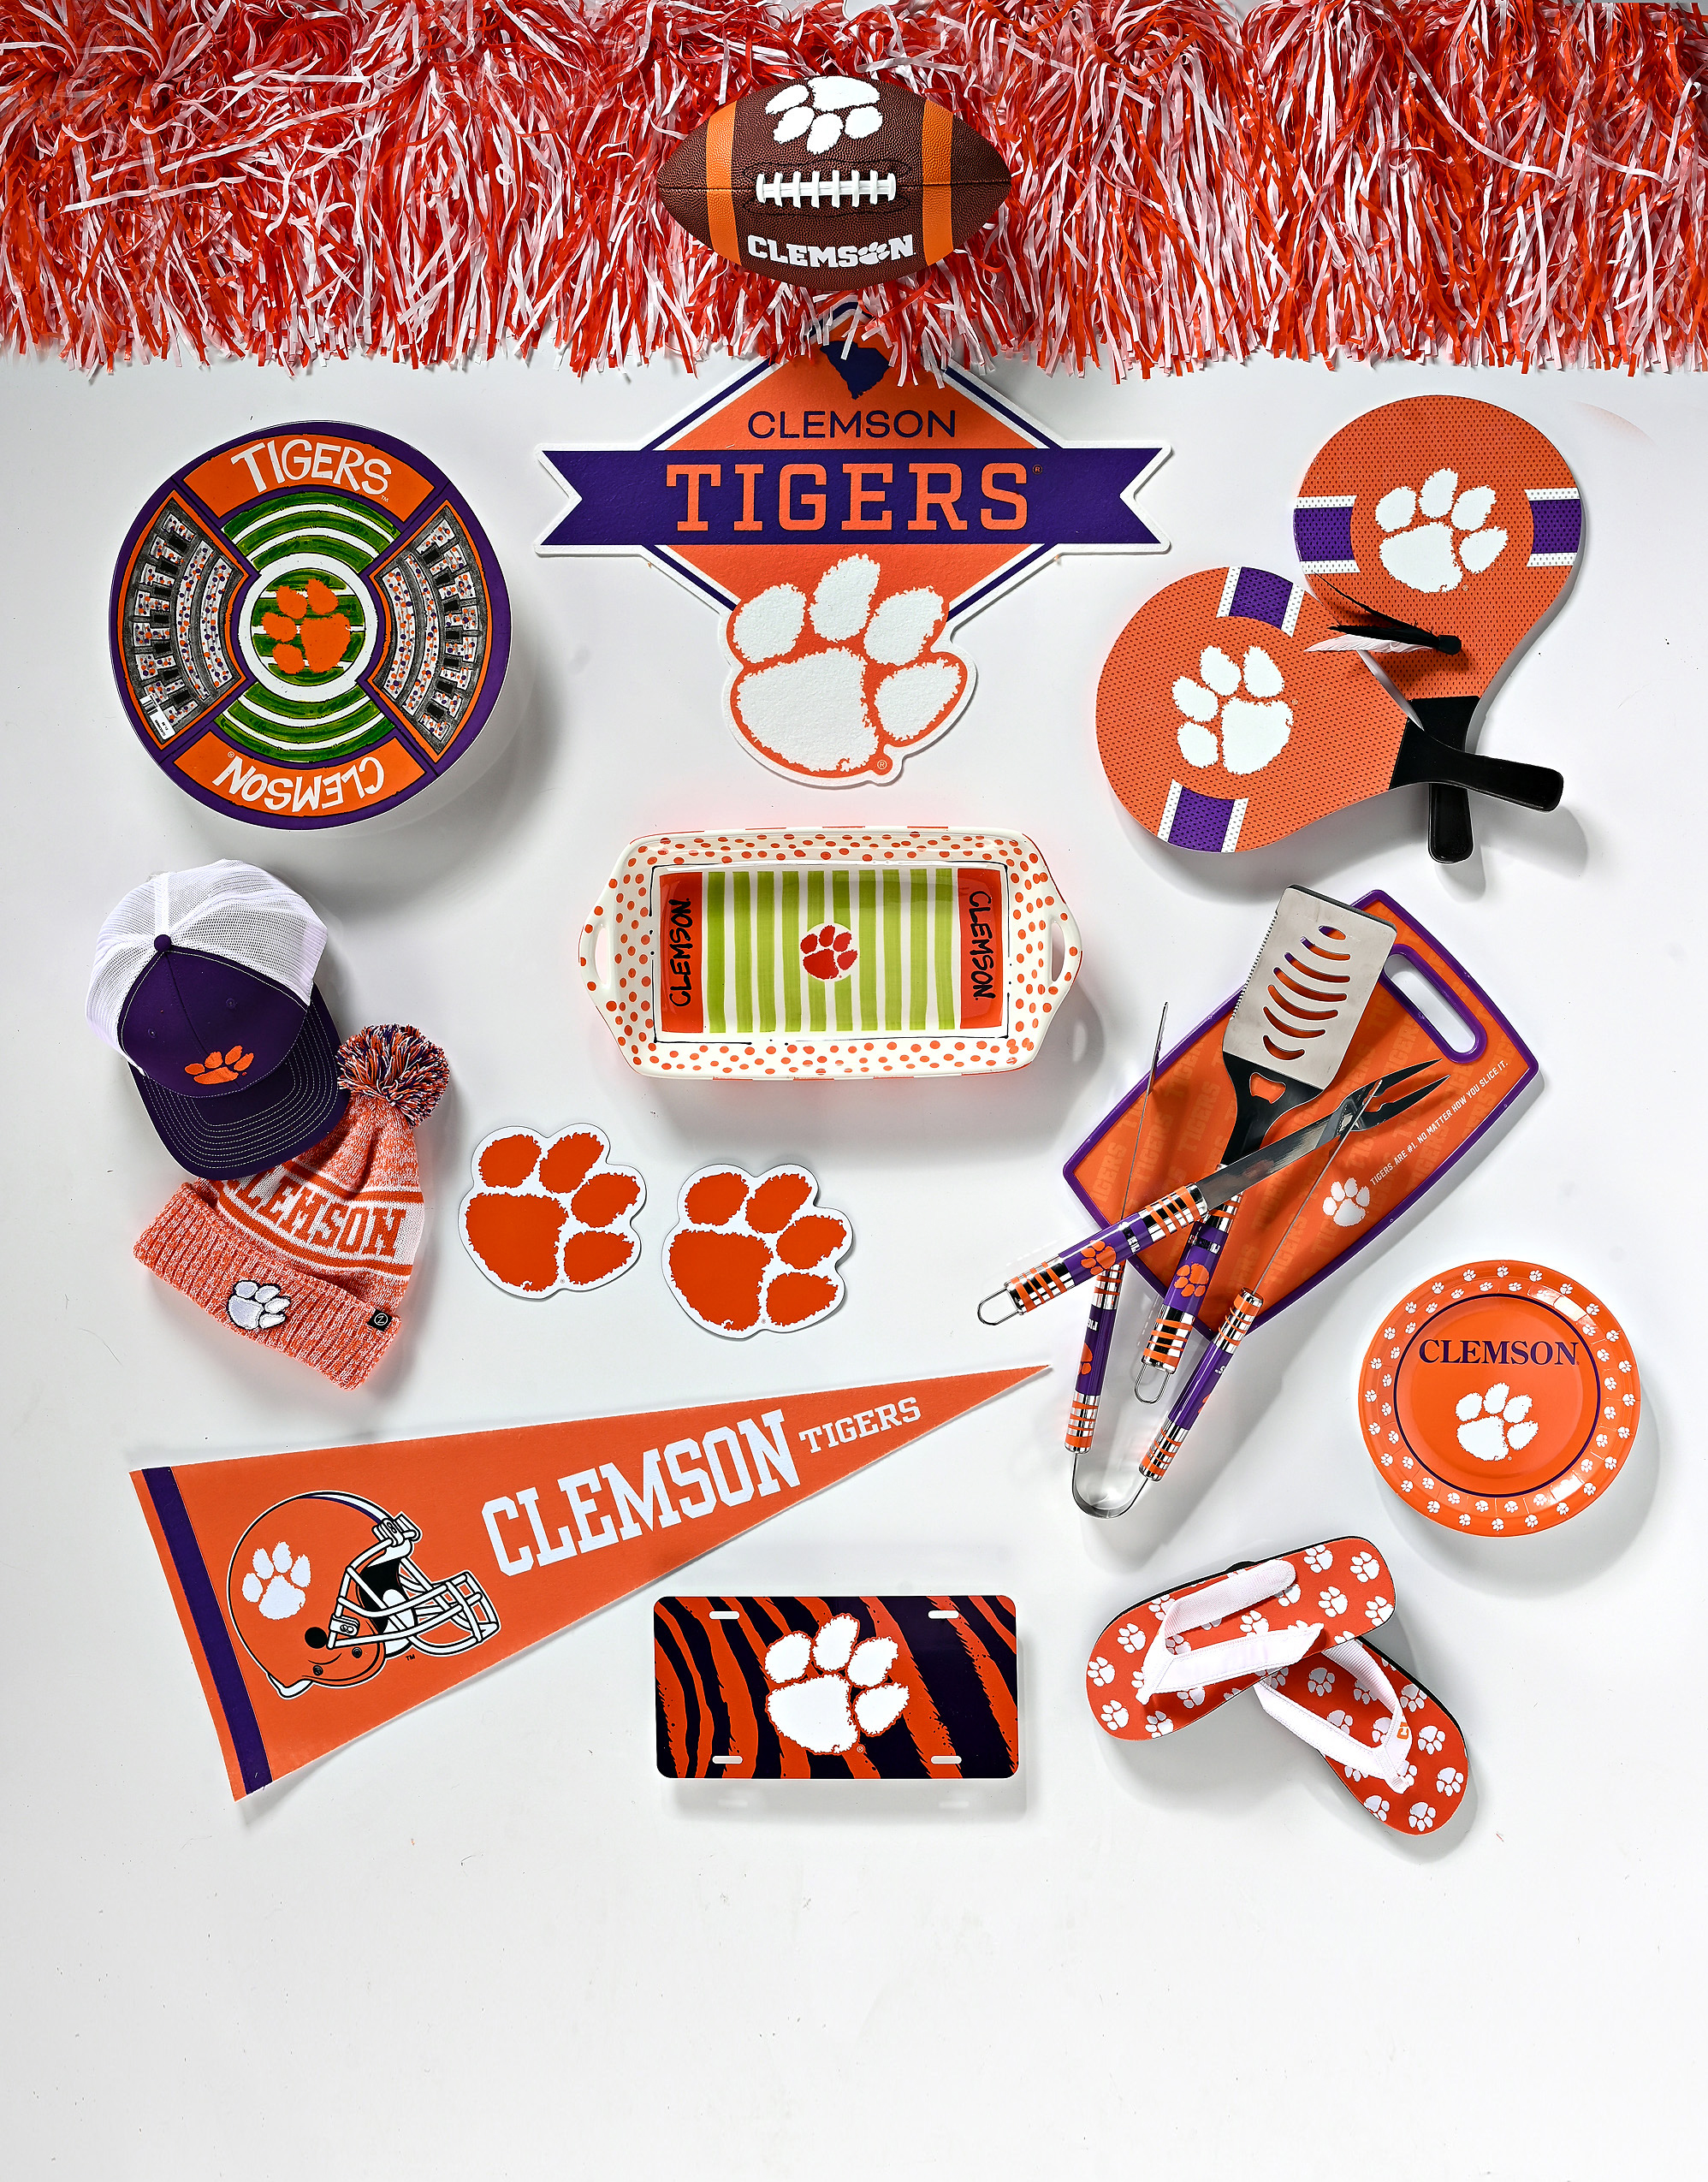 Clemson pompoms and air tech football, diamond-shaped Clemson logo, round and stadium platters, paddle birdie, magnetic orange paws, tiger tailgater 3-piece barbecue set, cutting board, and Clemson flip-flops courtesy of Clemson Traditions; Clemson pompoms, Richardson Clemson hat and beanie with puff, wall flag, 9-inch paper plates, and Clemson paw license plate courtesy of Todd & Moore.